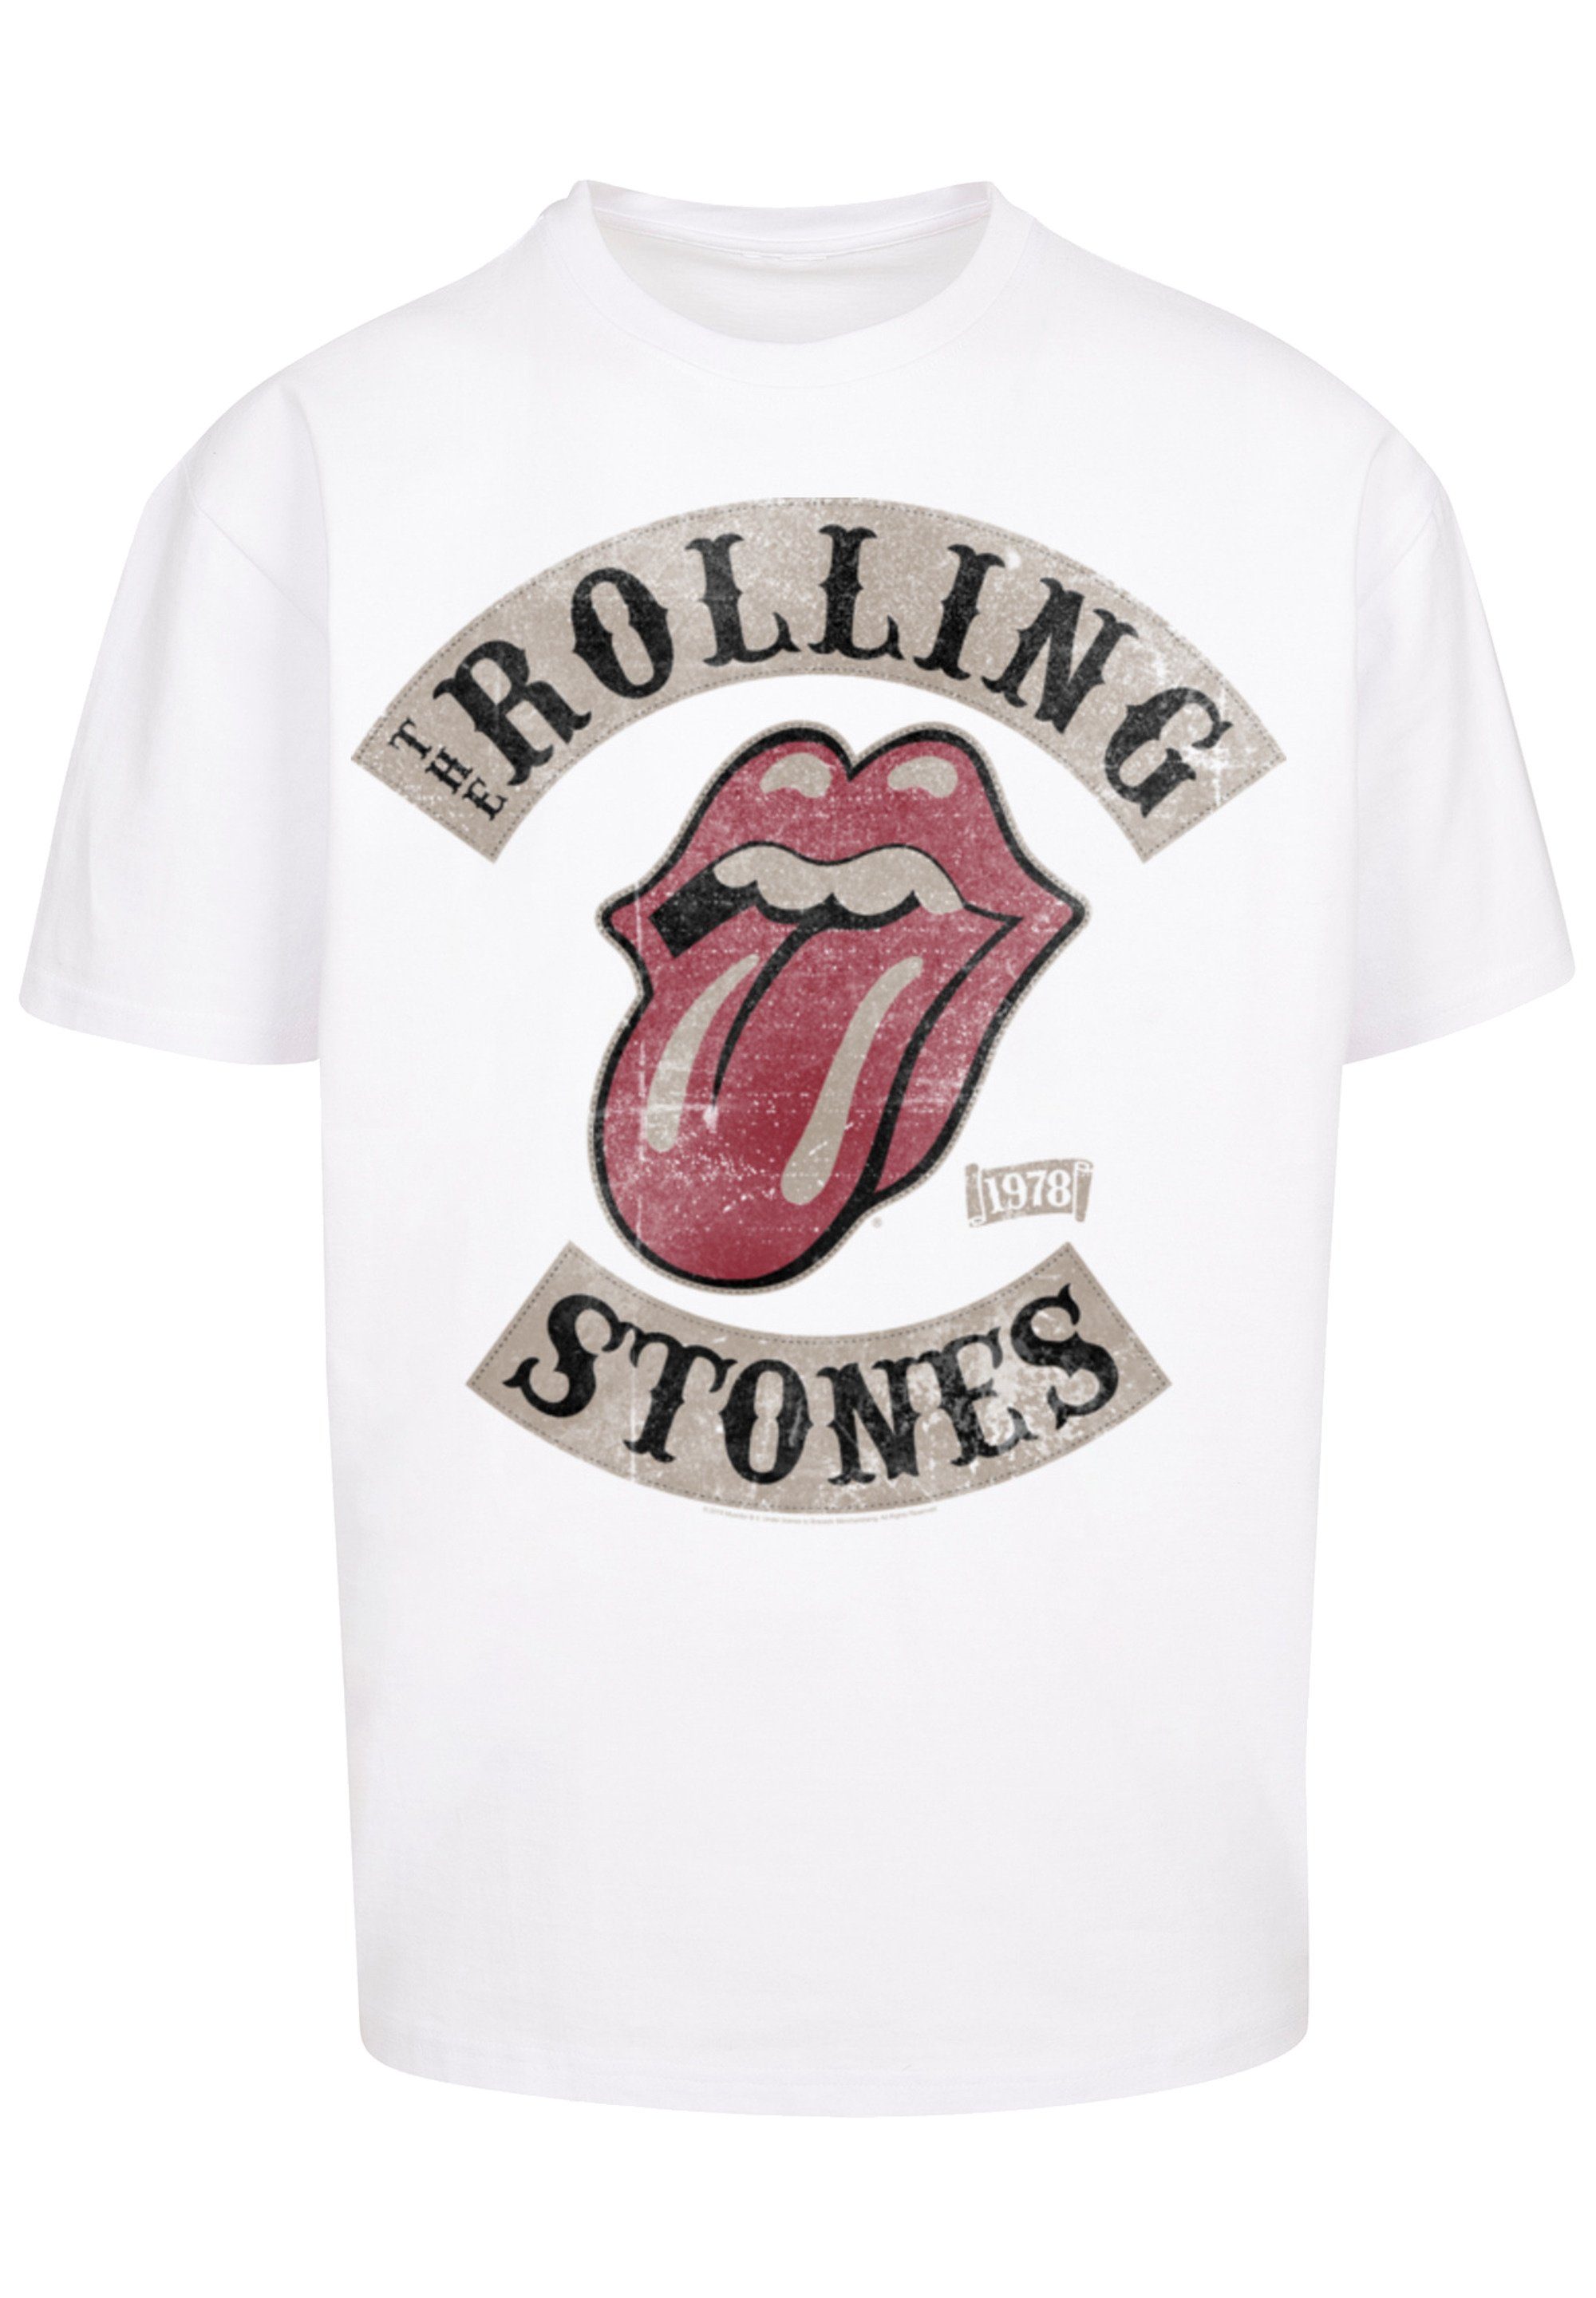 F4NT4STIC T-Shirt PLUS SIZE The Rolling Stones Tour '78 Print weiß